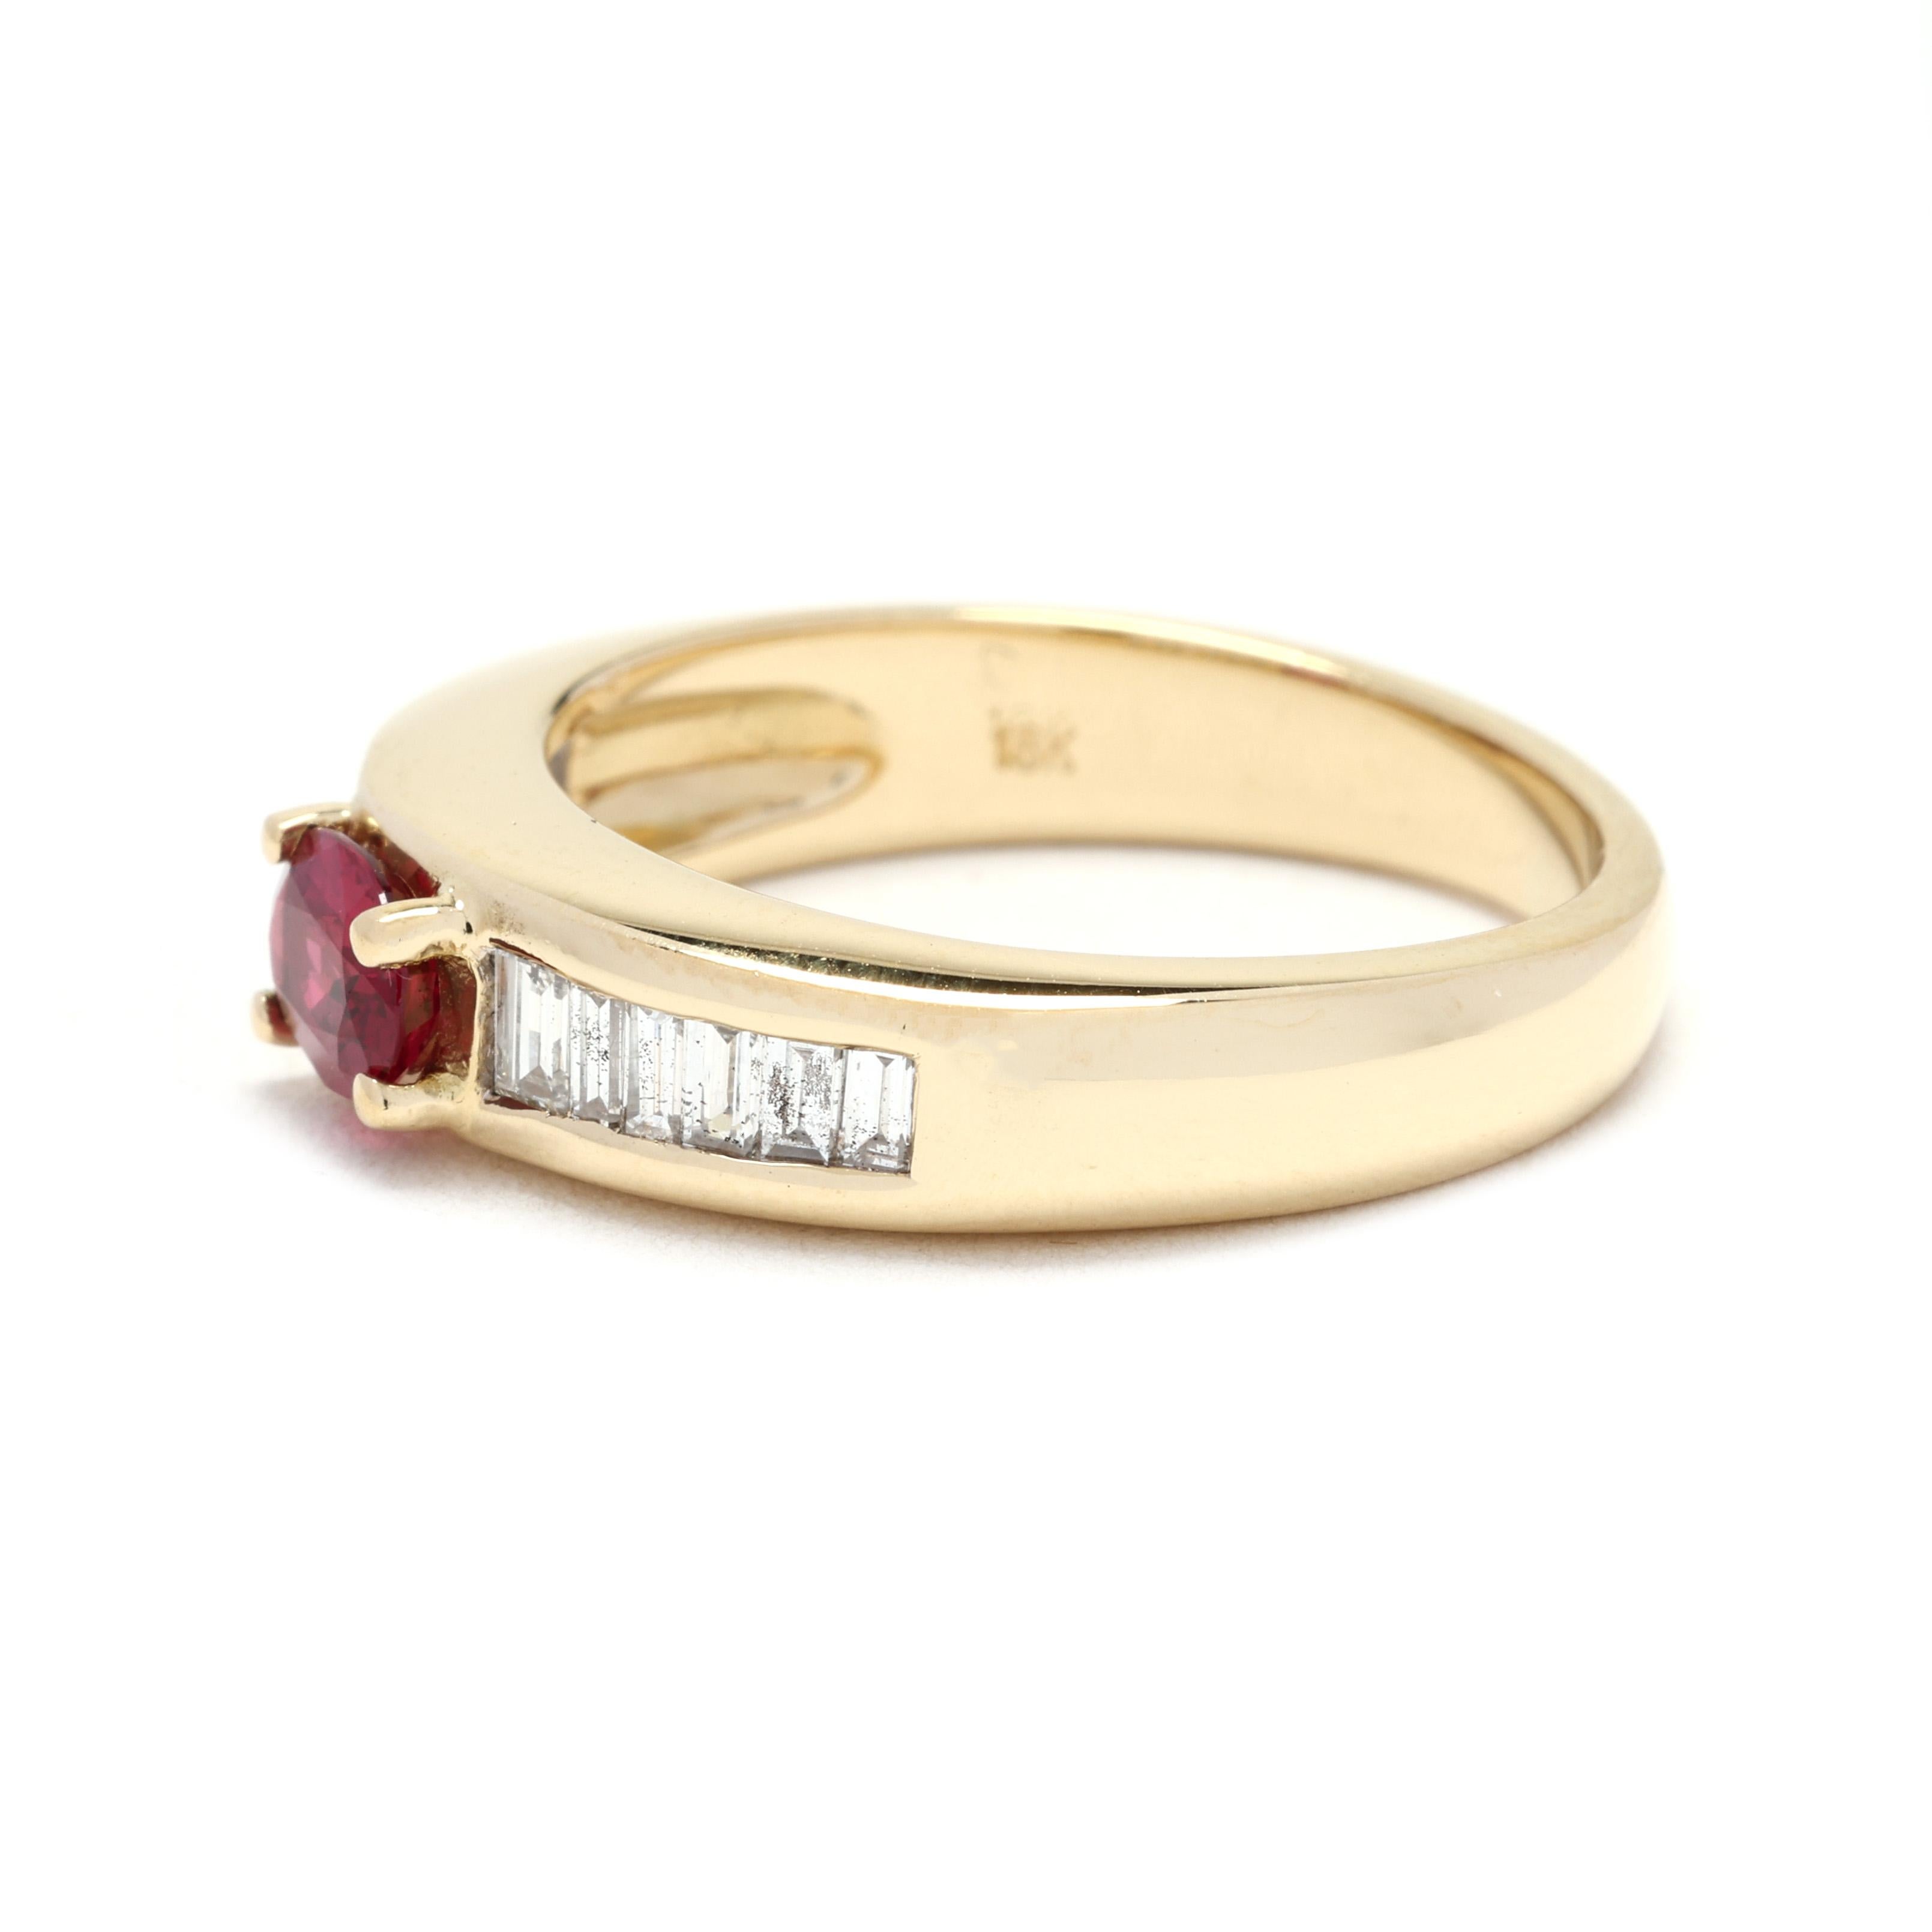 1.2ctw Diamond and Ruby Engagement Ring, 18k Yellow Gold, Ring Size 6.75 In Good Condition For Sale In McLeansville, NC